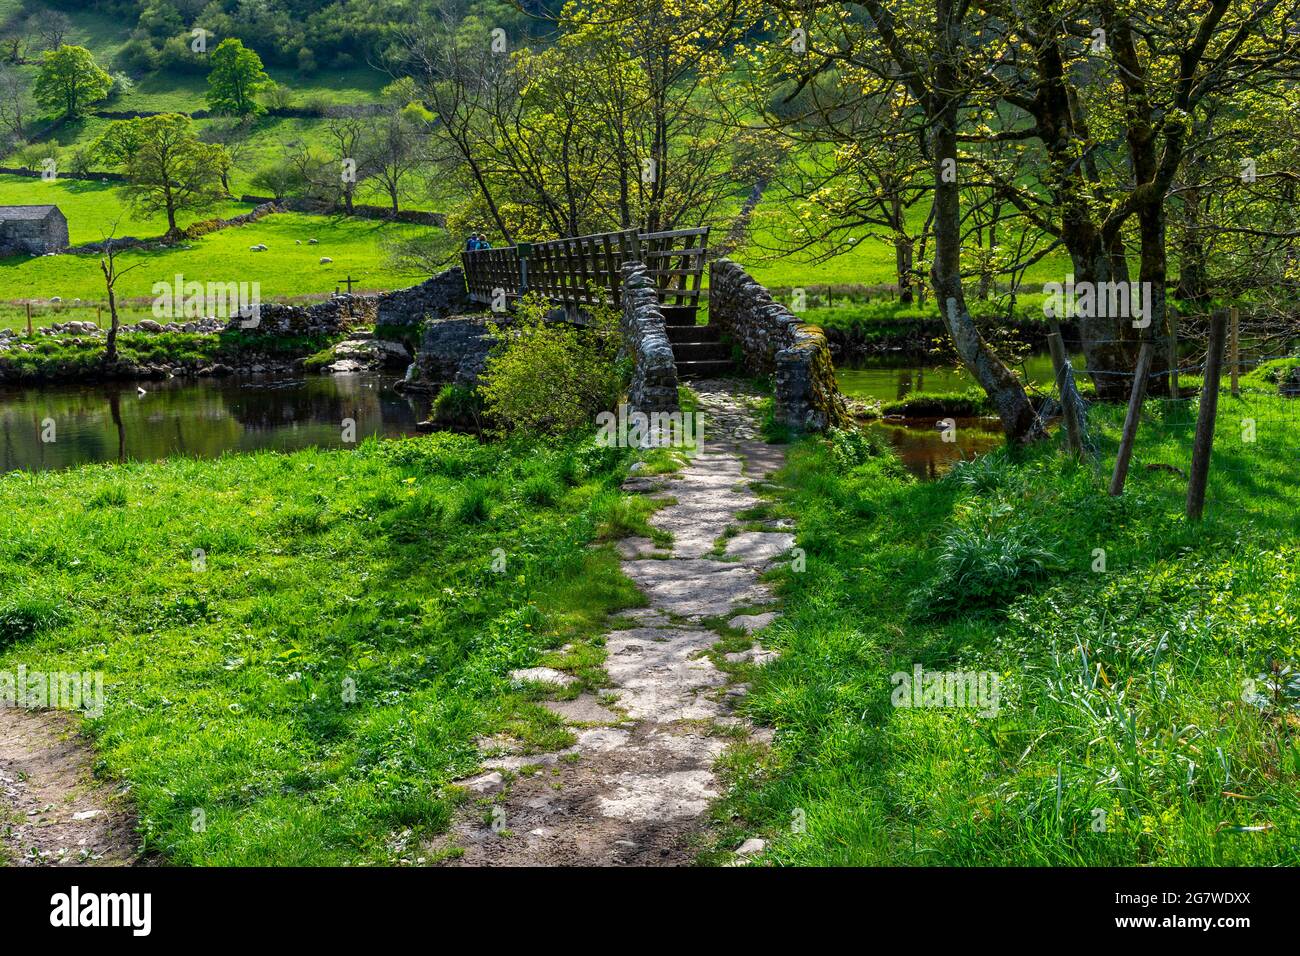 Track from the village of Starbotton leading to a footbridge over the river Wharfe, Wharfedale, Yorkshire Dales National Park, Yorkshire, England, UK Stock Photo